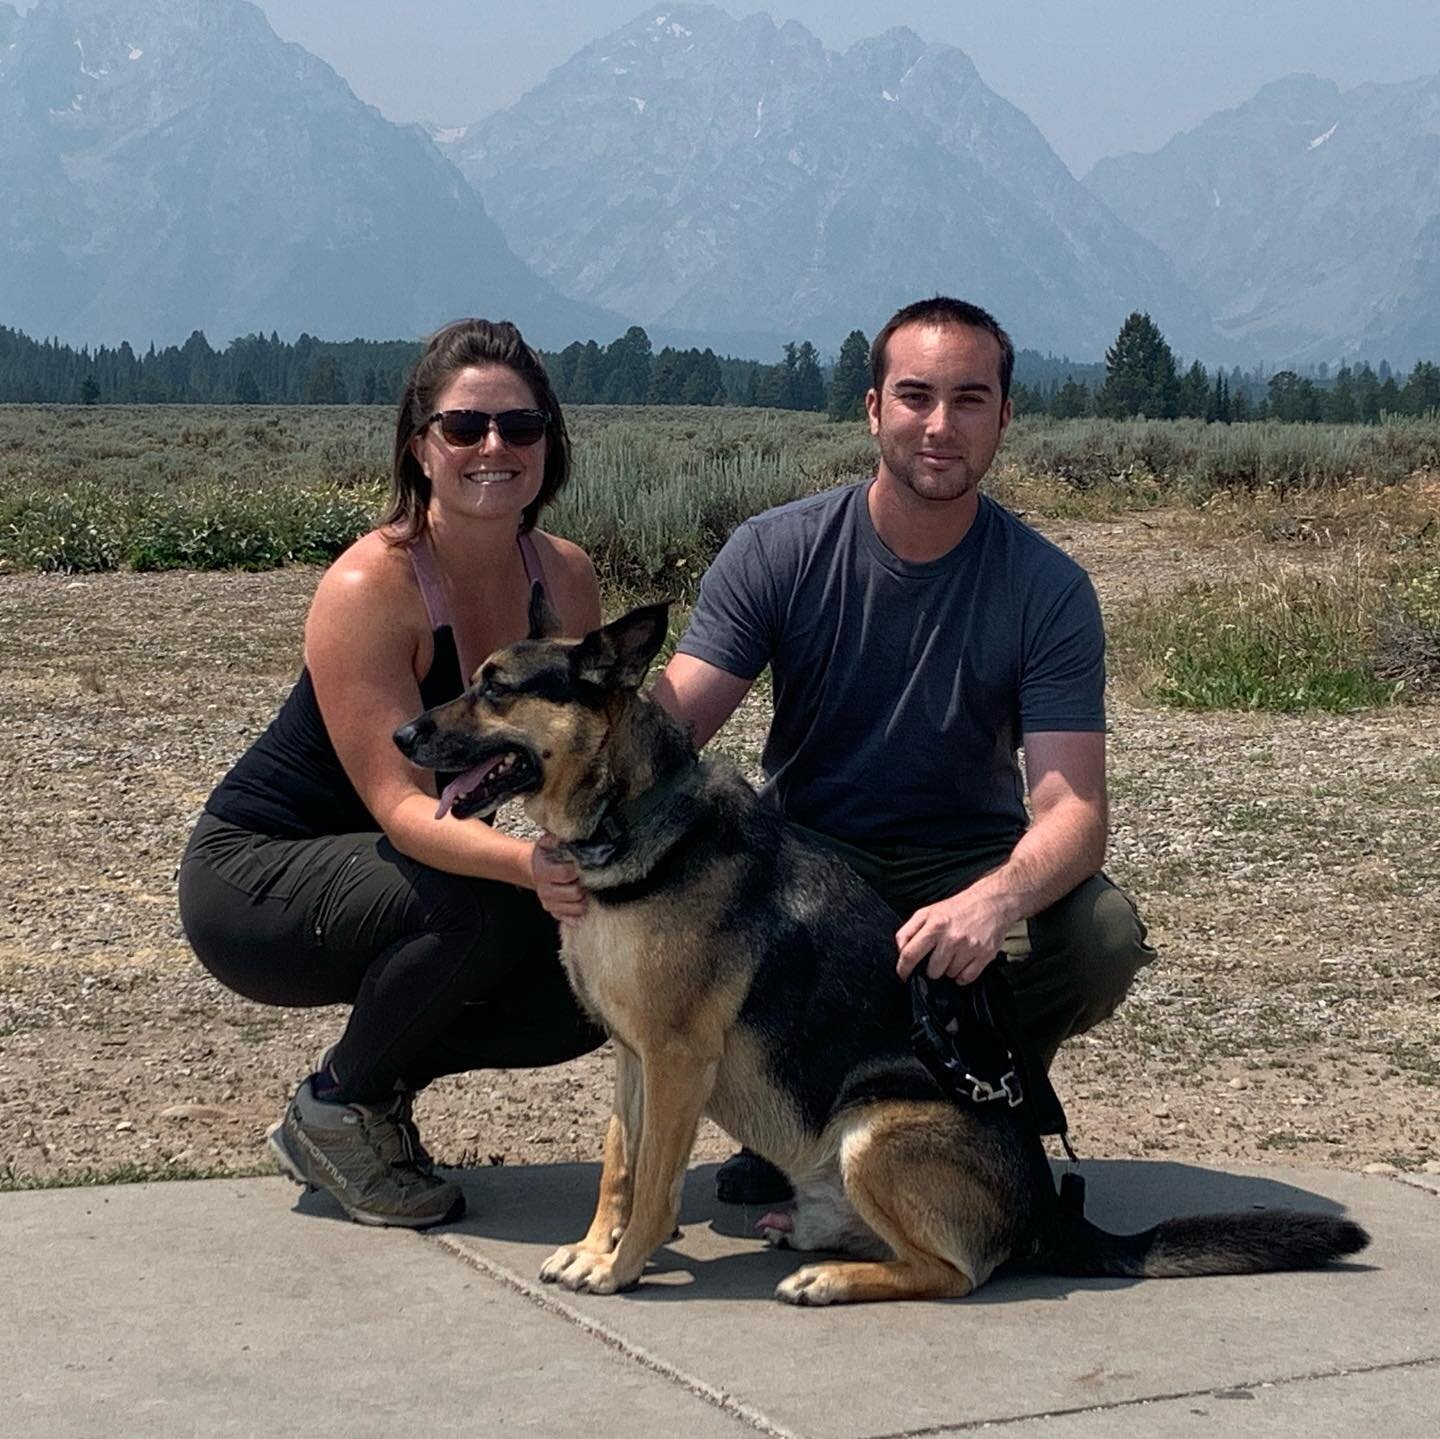 We&rsquo;re one week into a three-week family vacation and road trip across the Western States, hitting three national parks and countless national forests, state parks and cities along the way.

We&rsquo;ve been chasing a heat wave and wildfire smok